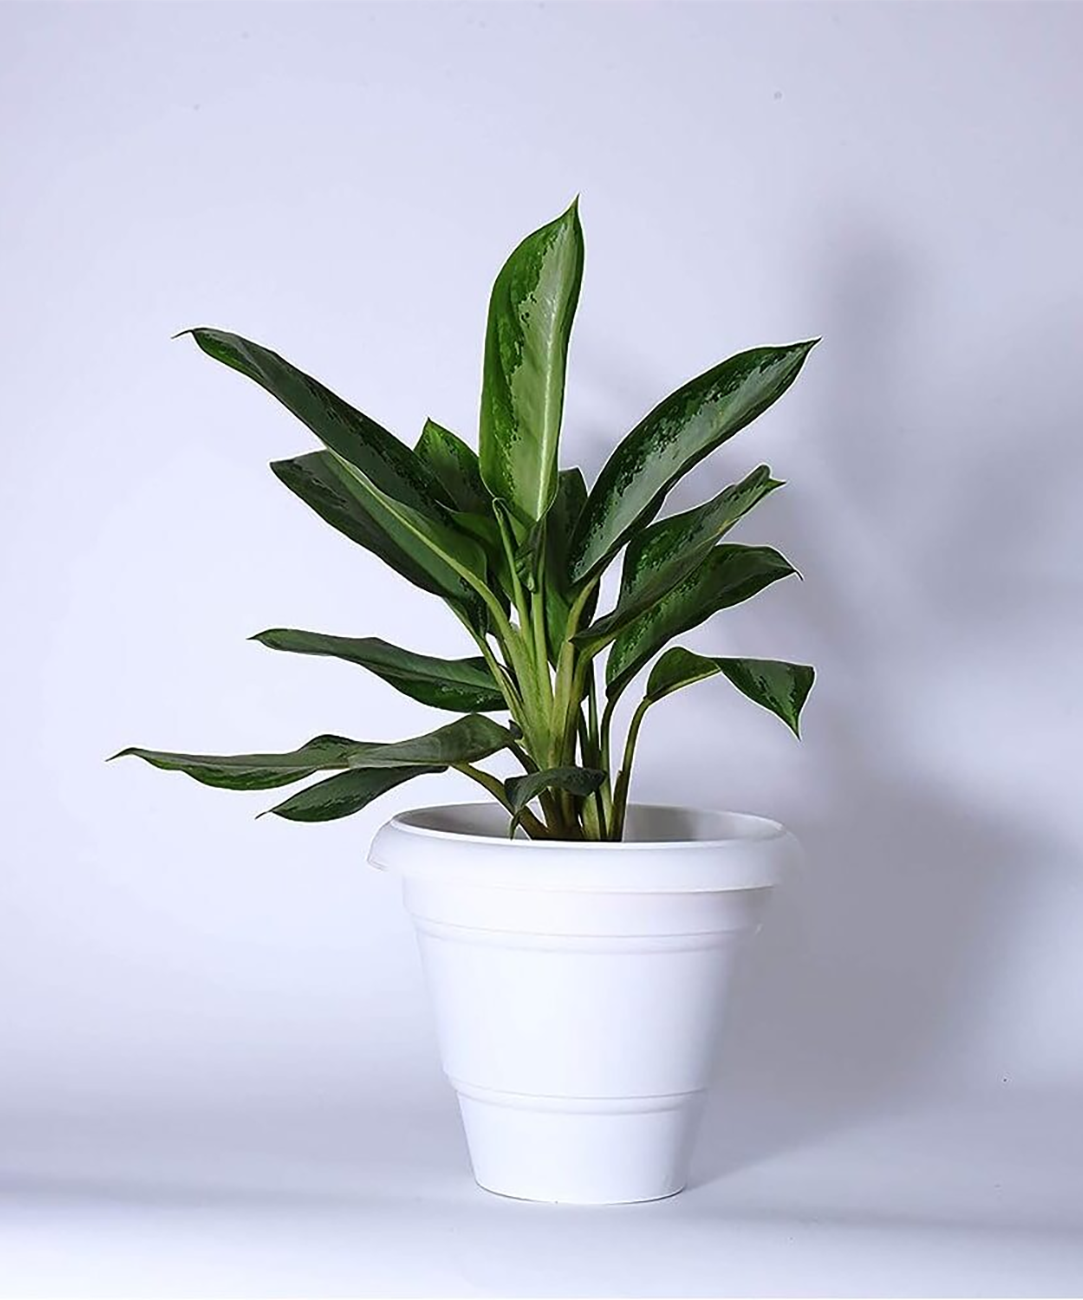 Deluxe Pot 10 Inches: Premium Elegance for Your Greenery